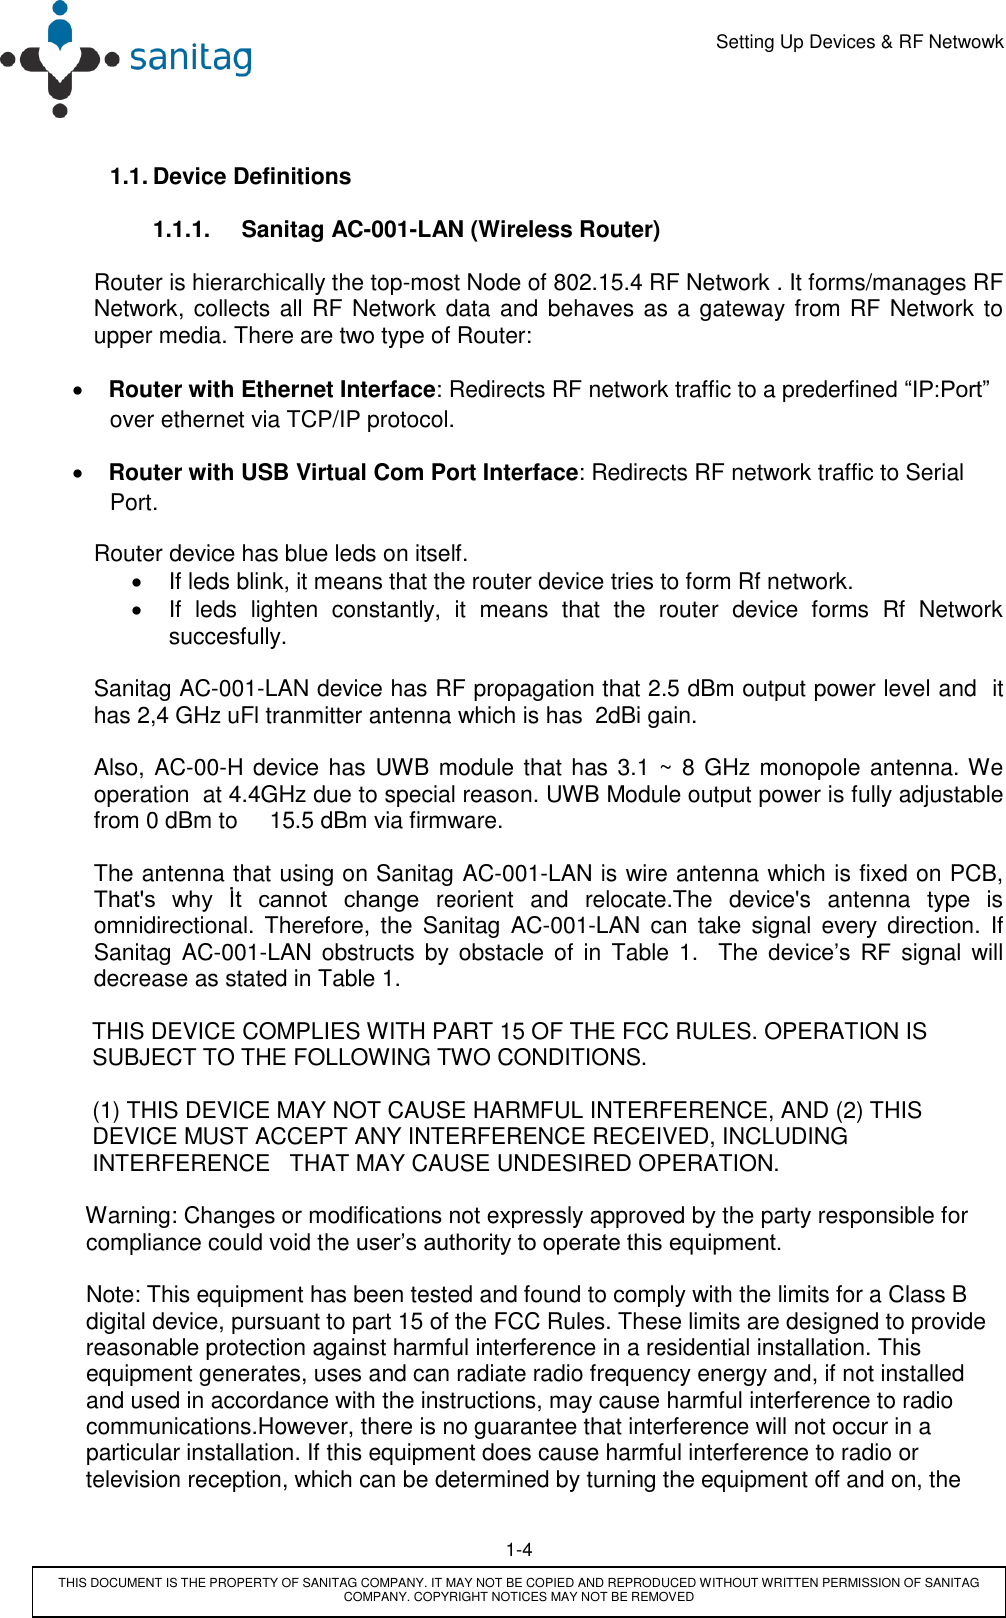      Setting Up Devices &amp; RF Netwowk        1-4         THIS DOCUMENT IS THE PROPERTY OF SANITAG COMPANY. IT MAY NOT BE COPIED AND REPRODUCED WITHOUT WRITTEN PERMISSION OF SANITAG COMPANY. COPYRIGHT NOTICES MAY NOT BE REMOVED  1.1. Device Definitions  1.1.1.  Sanitag AC-001-LAN (Wireless Router)  Router is hierarchically the top-most Node of 802.15.4 RF Network . It forms/manages RF Network, collects all RF Network data and behaves as a gateway from RF Network to upper media. There are two type of Router:   Router with Ethernet Interface: Redirects RF network traffic to a prederfined “IP:Port” over ethernet via TCP/IP protocol.  Router with USB Virtual Com Port Interface: Redirects RF network traffic to Serial Port. Router device has blue leds on itself.    If leds blink, it means that the router device tries to form Rf network.   If  leds  lighten  constantly,  it  means  that  the  router  device  forms  Rf  Network  succesfully.  Sanitag AC-001-LAN device has RF propagation that 2.5 dBm output power level and  it has 2,4 GHz uFl tranmitter antenna which is has  2dBi gain.  Also, AC-00-H device has UWB module that has 3.1 ~  8 GHz monopole antenna. We operation  at 4.4GHz due to special reason. UWB Module output power is fully adjustable from 0 dBm to     15.5 dBm via firmware.  The antenna that using on Sanitag AC-001-LAN is wire antenna which is fixed on PCB, That&apos;s  why  İt  cannot  change  reorient  and  relocate.The  device&apos;s  antenna  type  is omnidirectional. Therefore, the  Sanitag  AC-001-LAN  can  take  signal  every  direction. If Sanitag  AC-001-LAN  obstructs  by  obstacle  of  in  Table  1.    The device’s  RF signal  will decrease as stated in Table 1.            THIS DEVICE COMPLIES WITH PART 15 OF THE FCC RULES. OPERATION IS                       SUBJECT TO THE FOLLOWING TWO CONDITIONS.           (1) THIS DEVICE MAY NOT CAUSE HARMFUL INTERFERENCE, AND (2) THIS              DEVICE MUST ACCEPT ANY INTERFERENCE RECEIVED, INCLUDING             INTERFERENCE   THAT MAY CAUSE UNDESIRED OPERATION.          Warning: Changes or modifications not expressly approved by the party responsible for          compliance could void the user’s authority to operate this equipment.           Note: This equipment has been tested and found to comply with the limits for a Class B           digital device, pursuant to part 15 of the FCC Rules. These limits are designed to provide         reasonable protection against harmful interference in a residential installation. This          equipment generates, uses and can radiate radio frequency energy and, if not installed            and used in accordance with the instructions, may cause harmful interference to radio             communications.However, there is no guarantee that interference will not occur in a           particular installation. If this equipment does cause harmful interference to radio or          television reception, which can be determined by turning the equipment off and on, the    